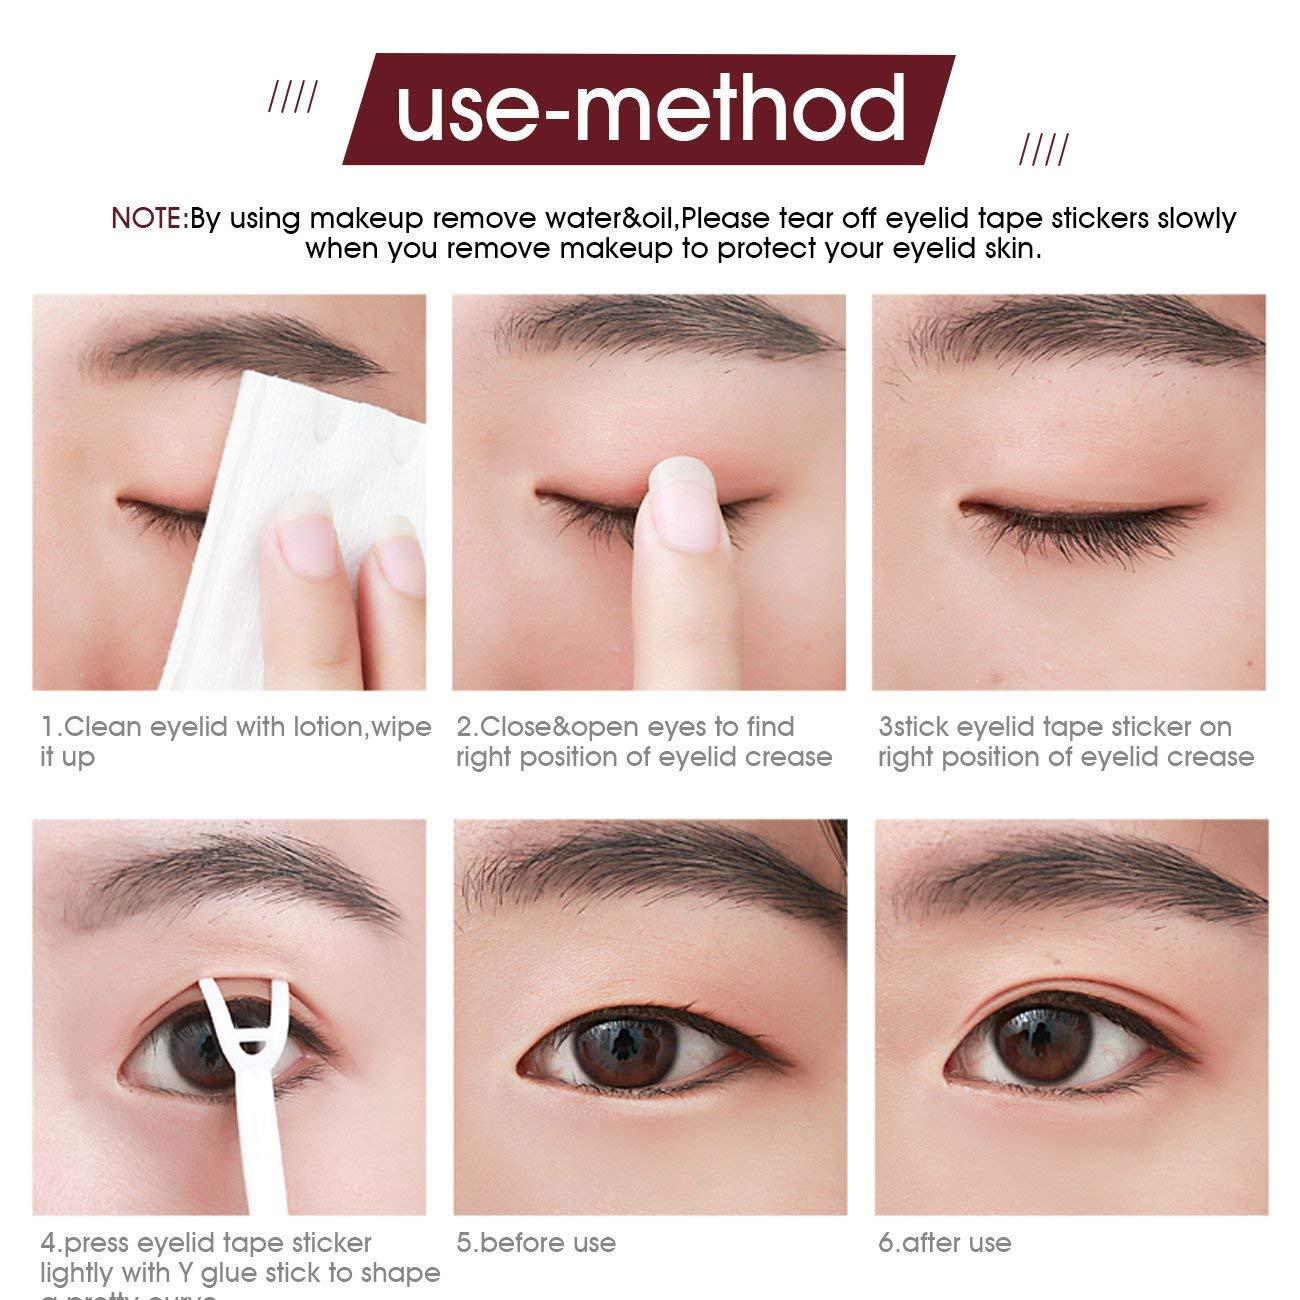 Don't use double eyelid tape - The Korea Times